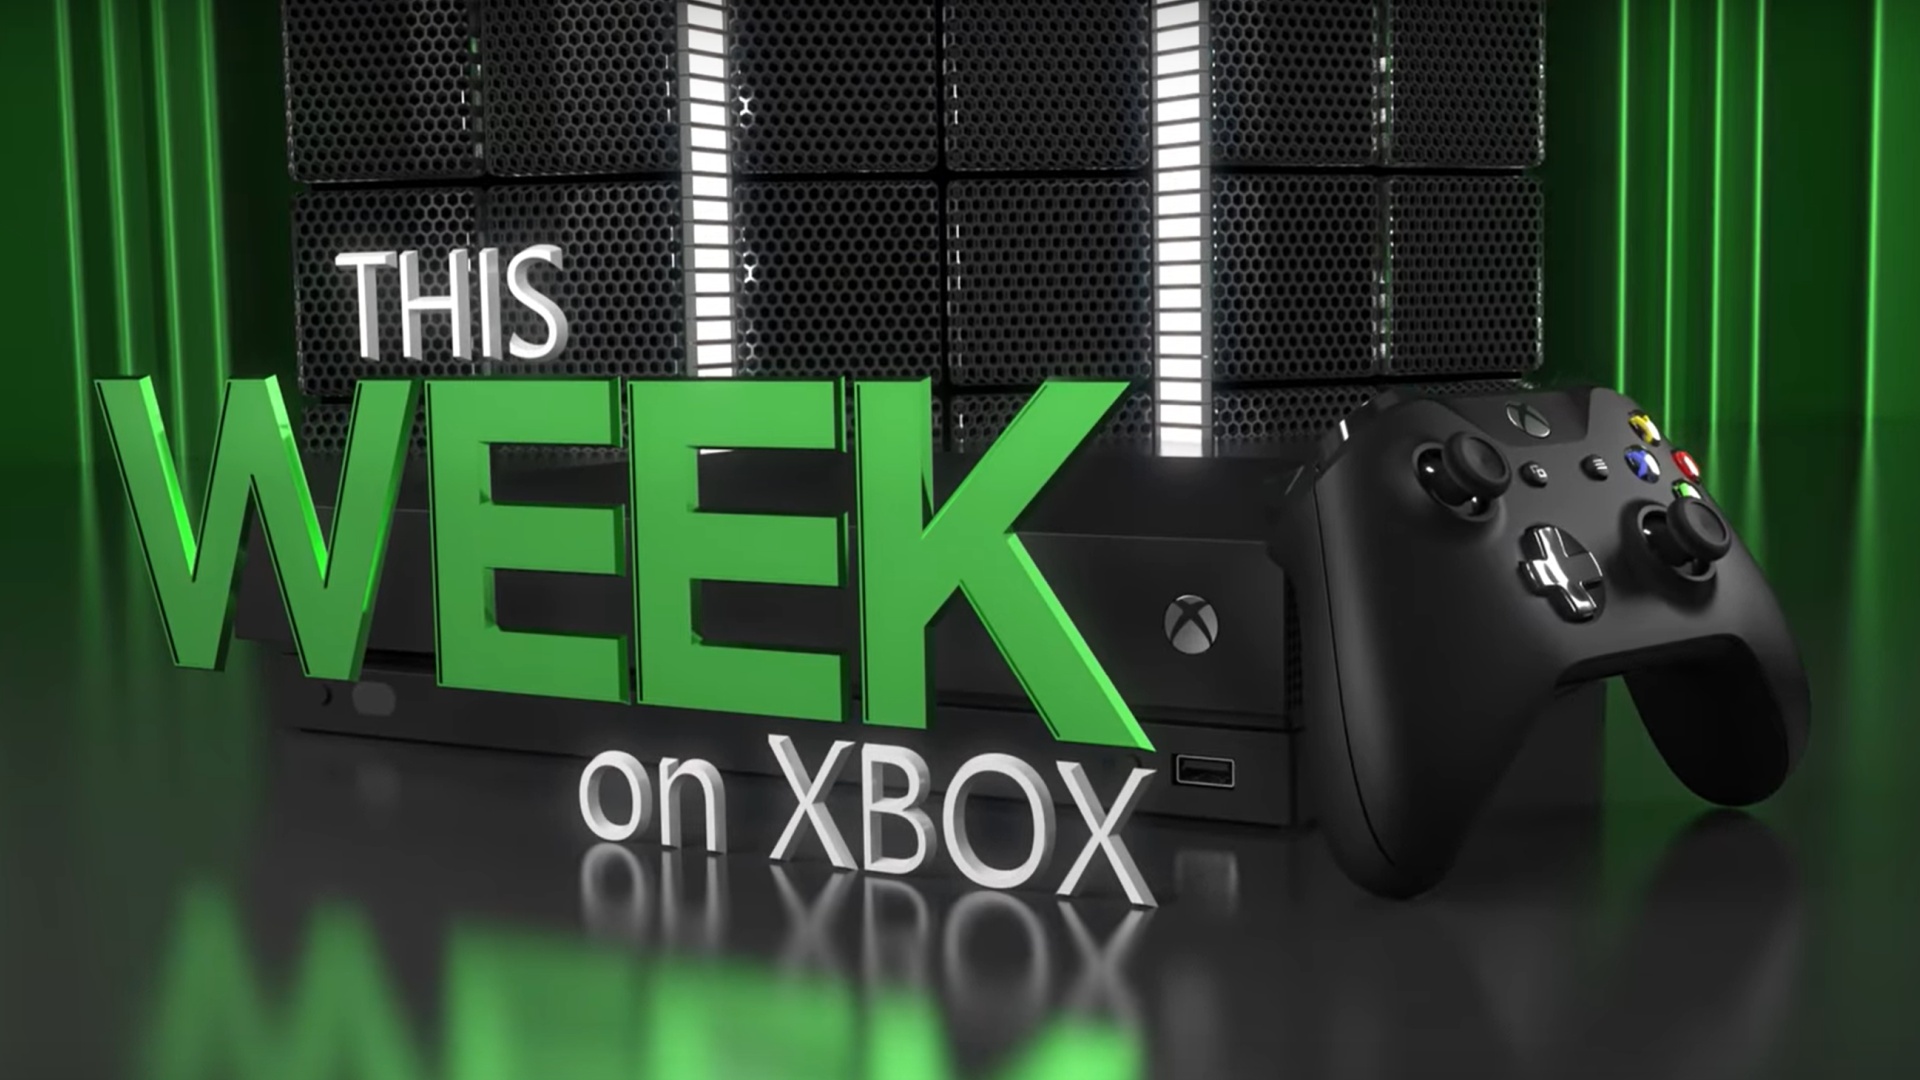 Video For This Week on Xbox: January 24, 2020